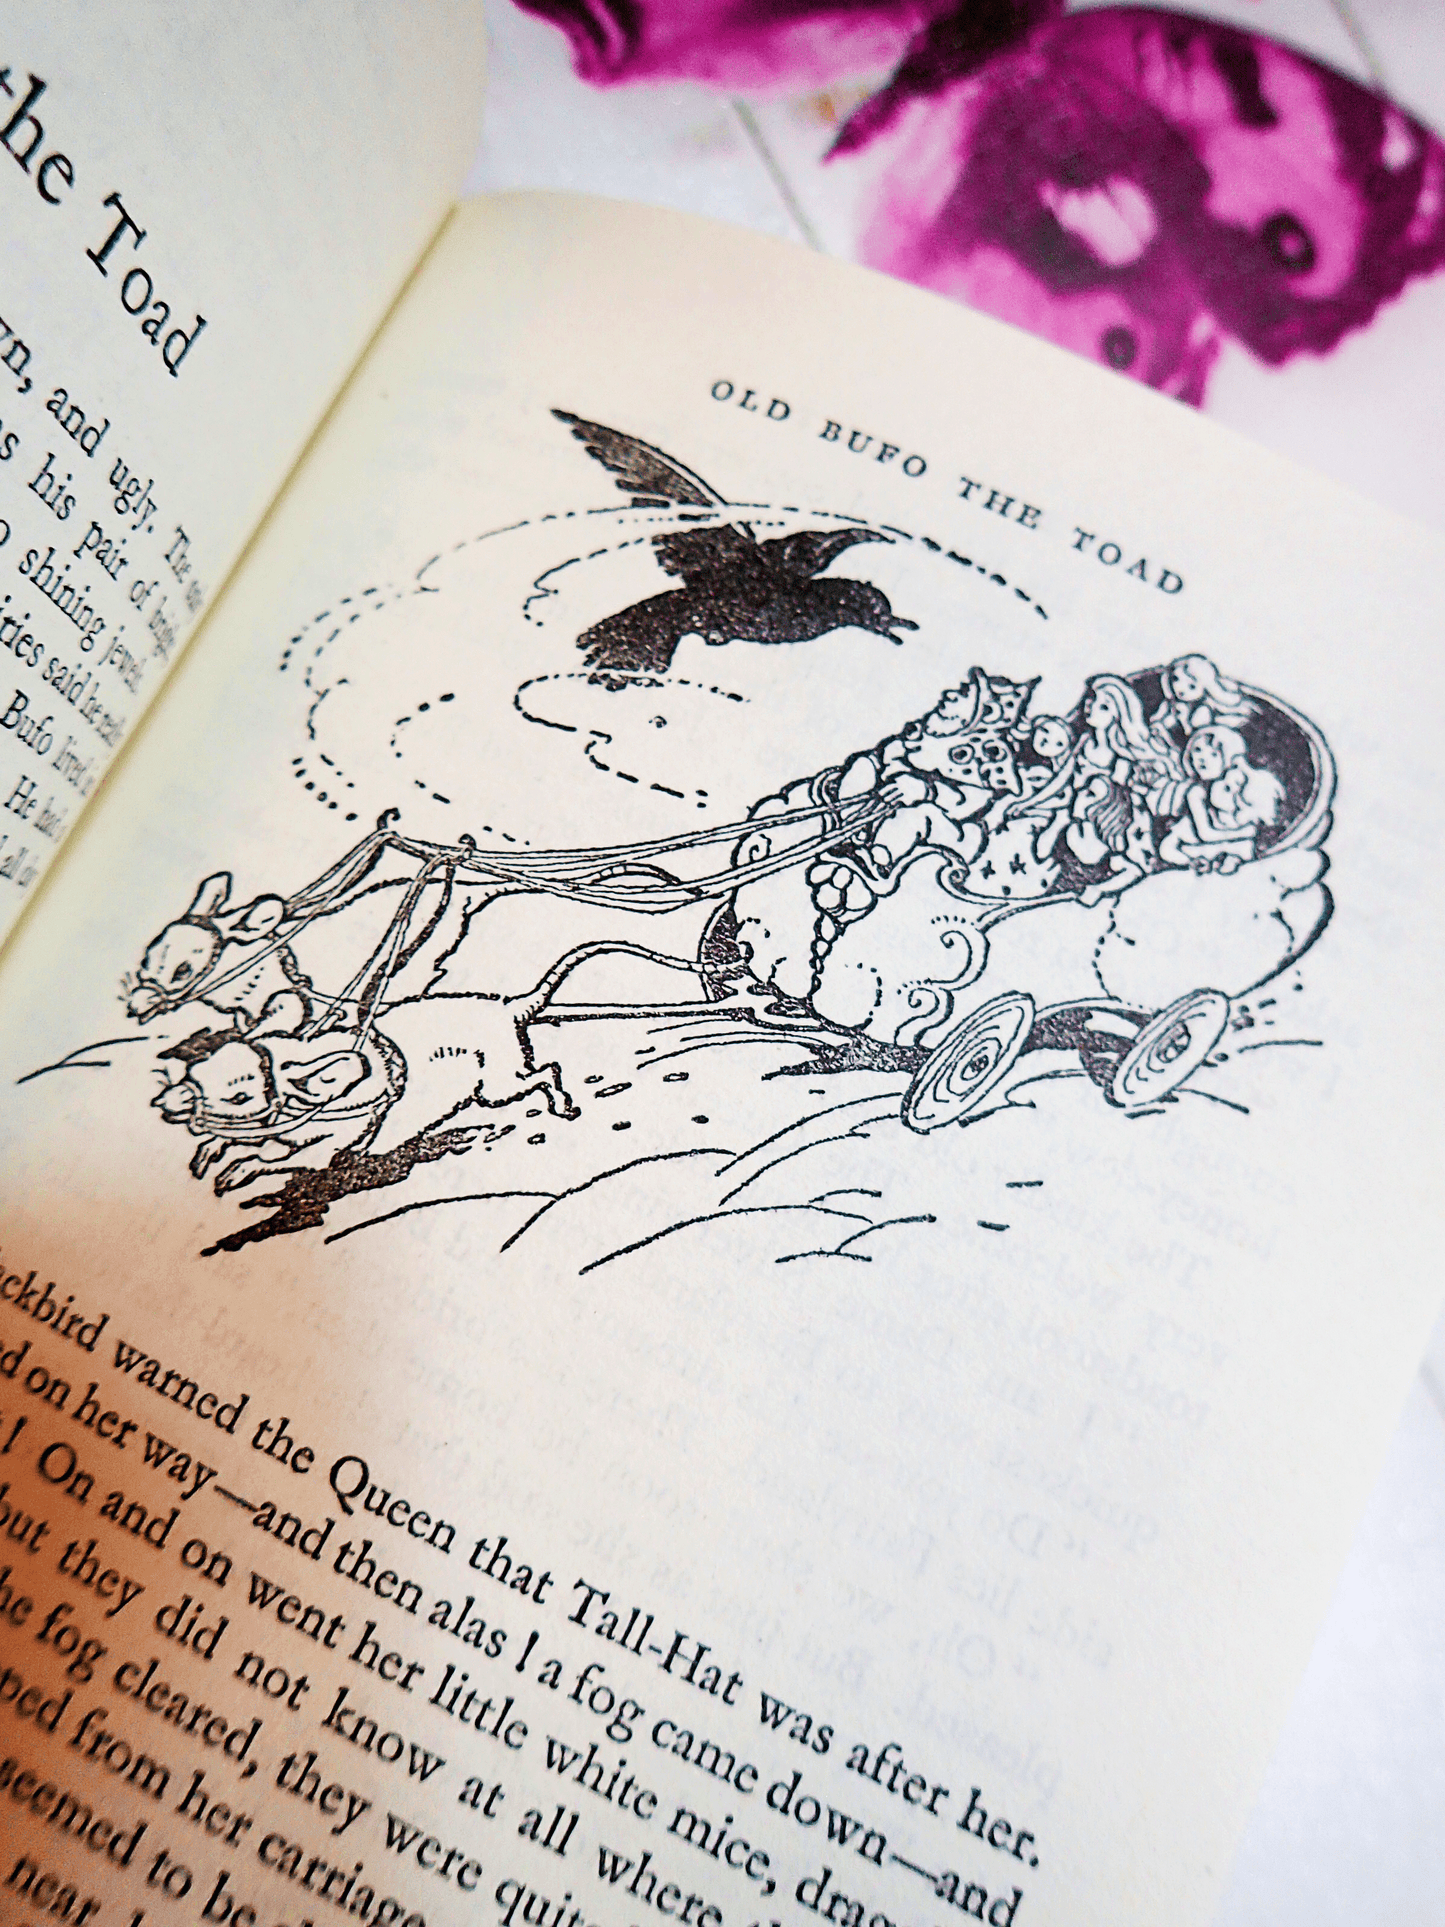 Illustration from Enid Blyton's Round the Clock Stories Vintage Children's Book 1970's Bedtime Fairytales showing mice pulling a fairytale carriage.